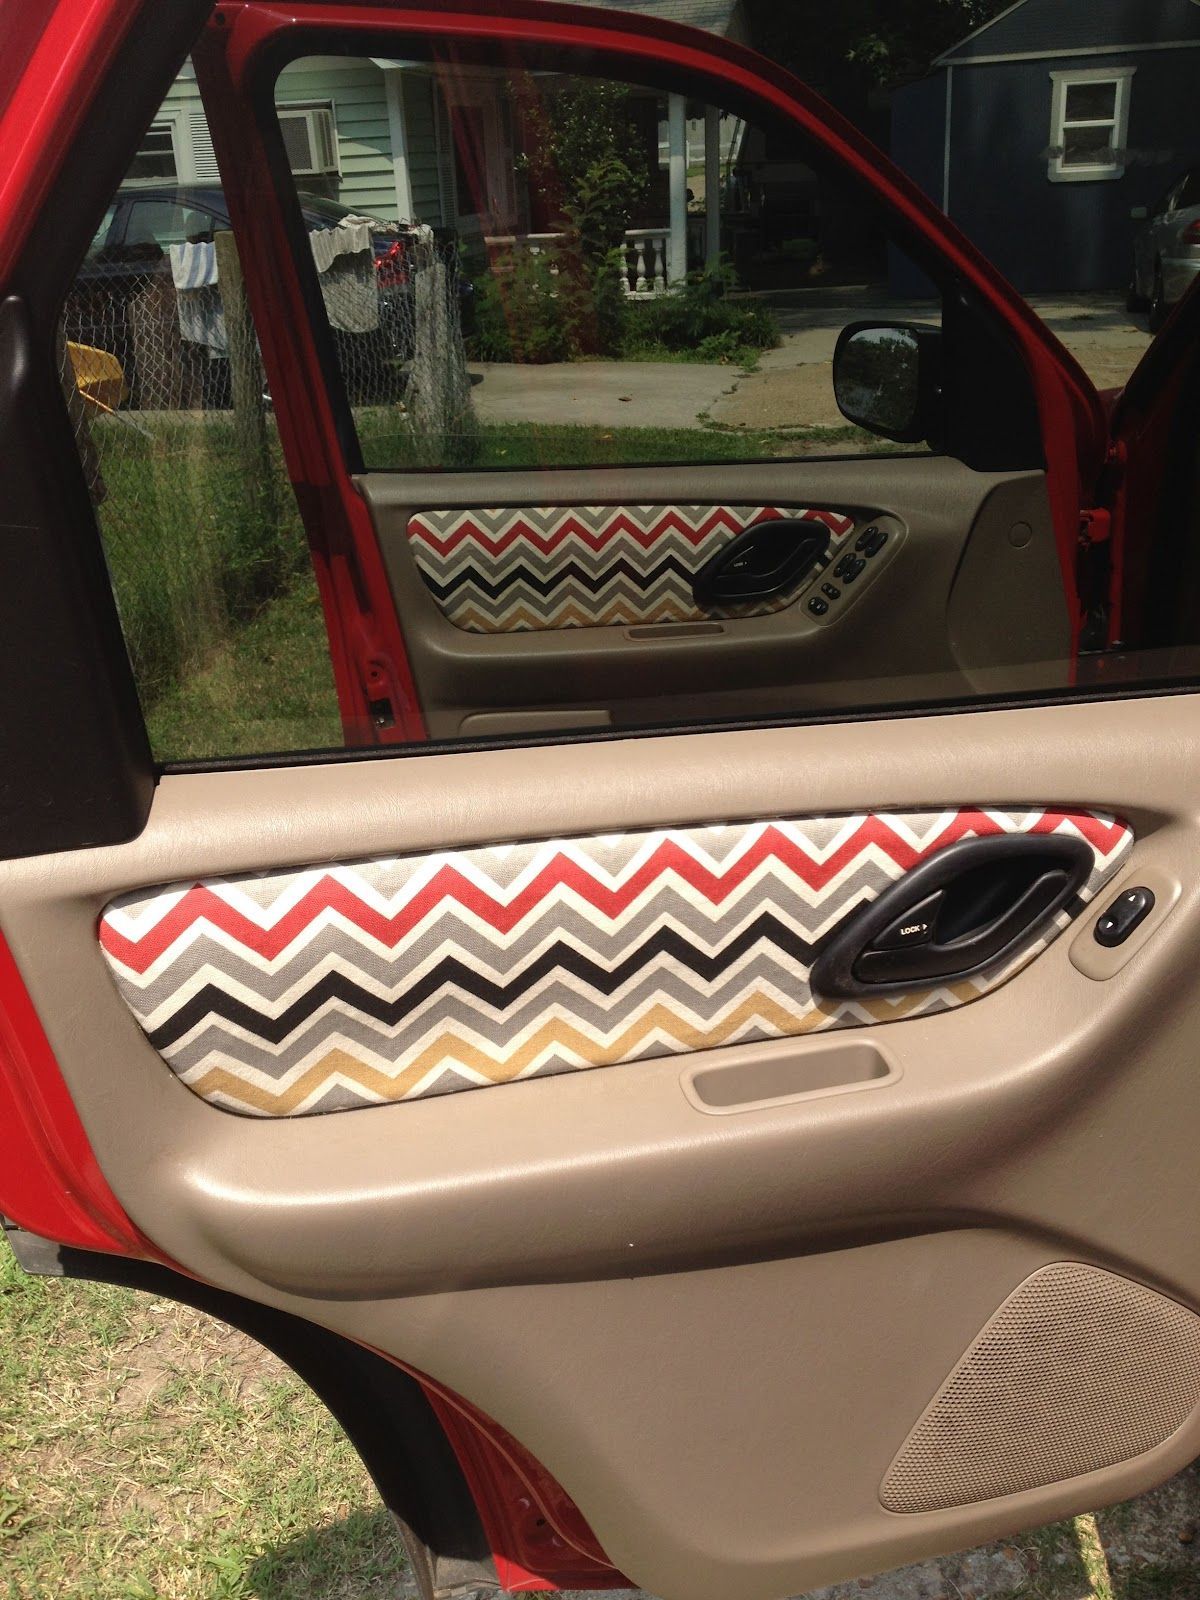 Apply new fabric to the inside of your car! I am saving this for when my car starts to rip and wear!